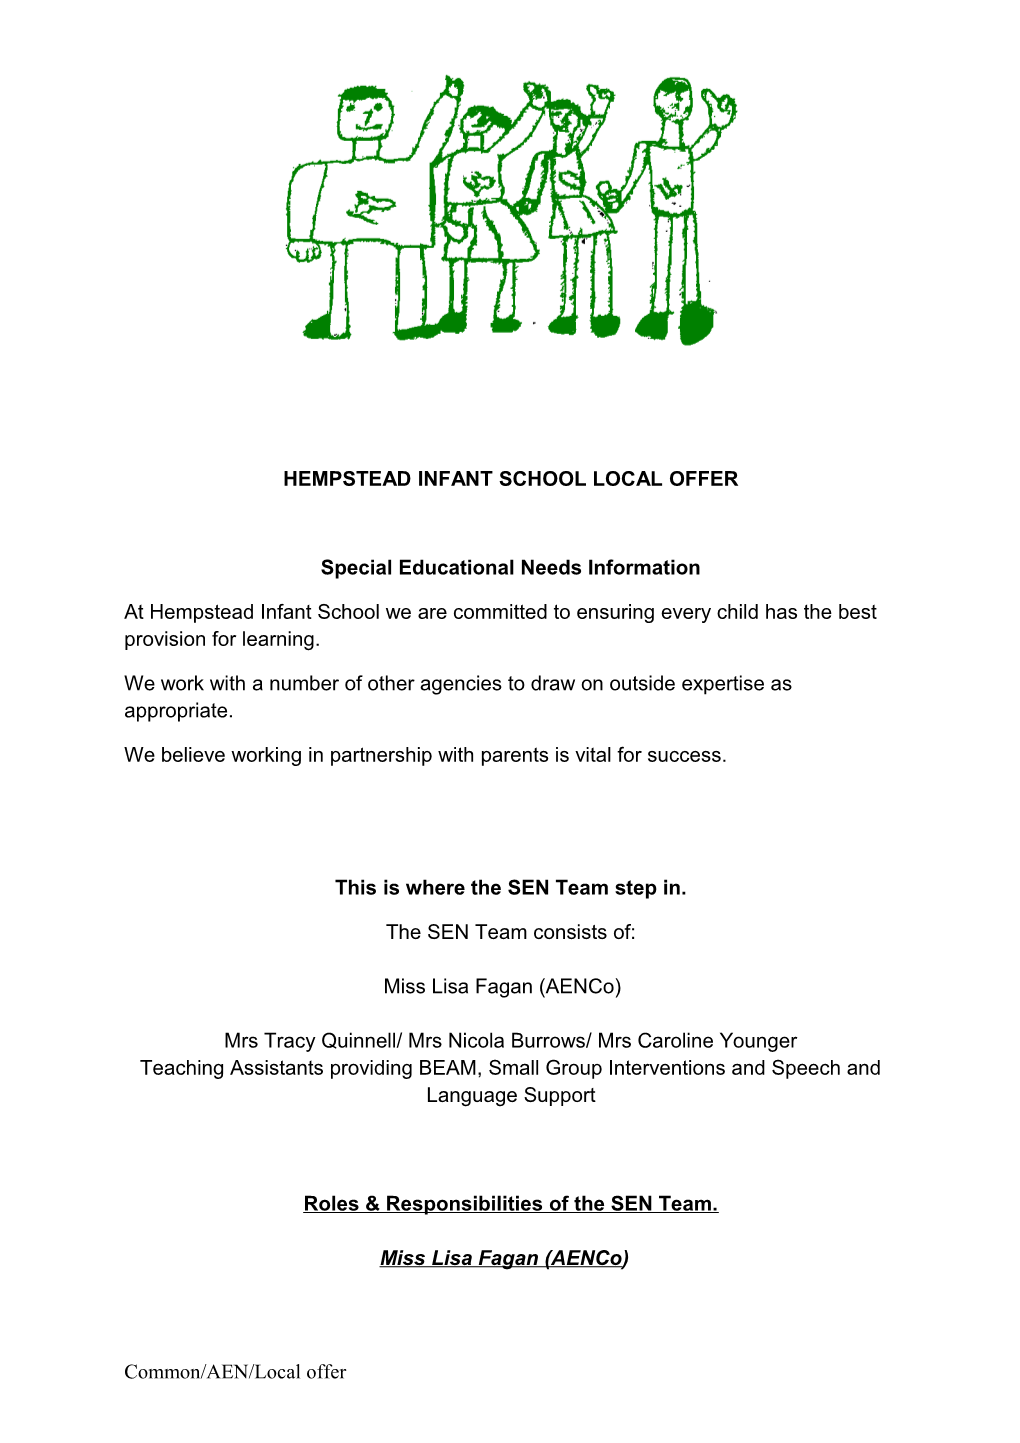 Special Educational Needs Information